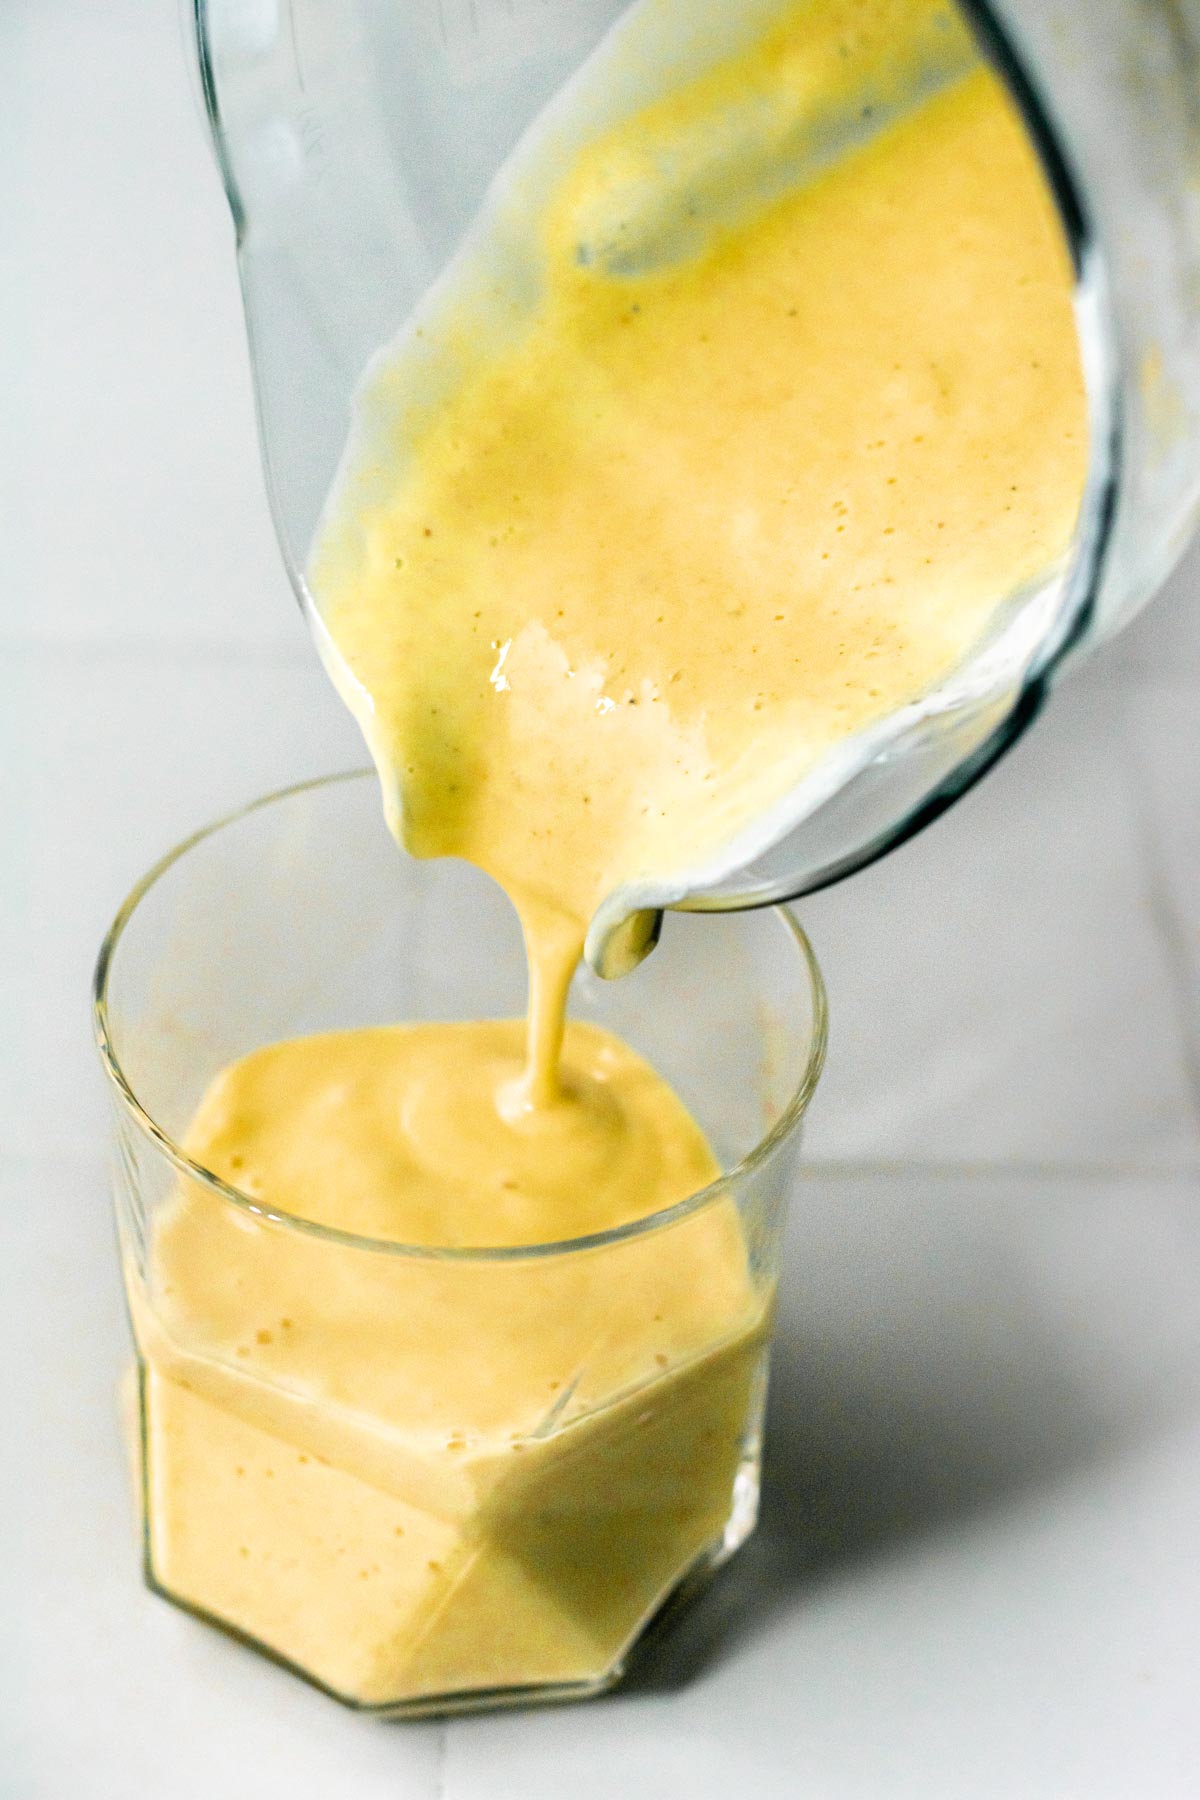 mango lassi being poured into a geometric glass